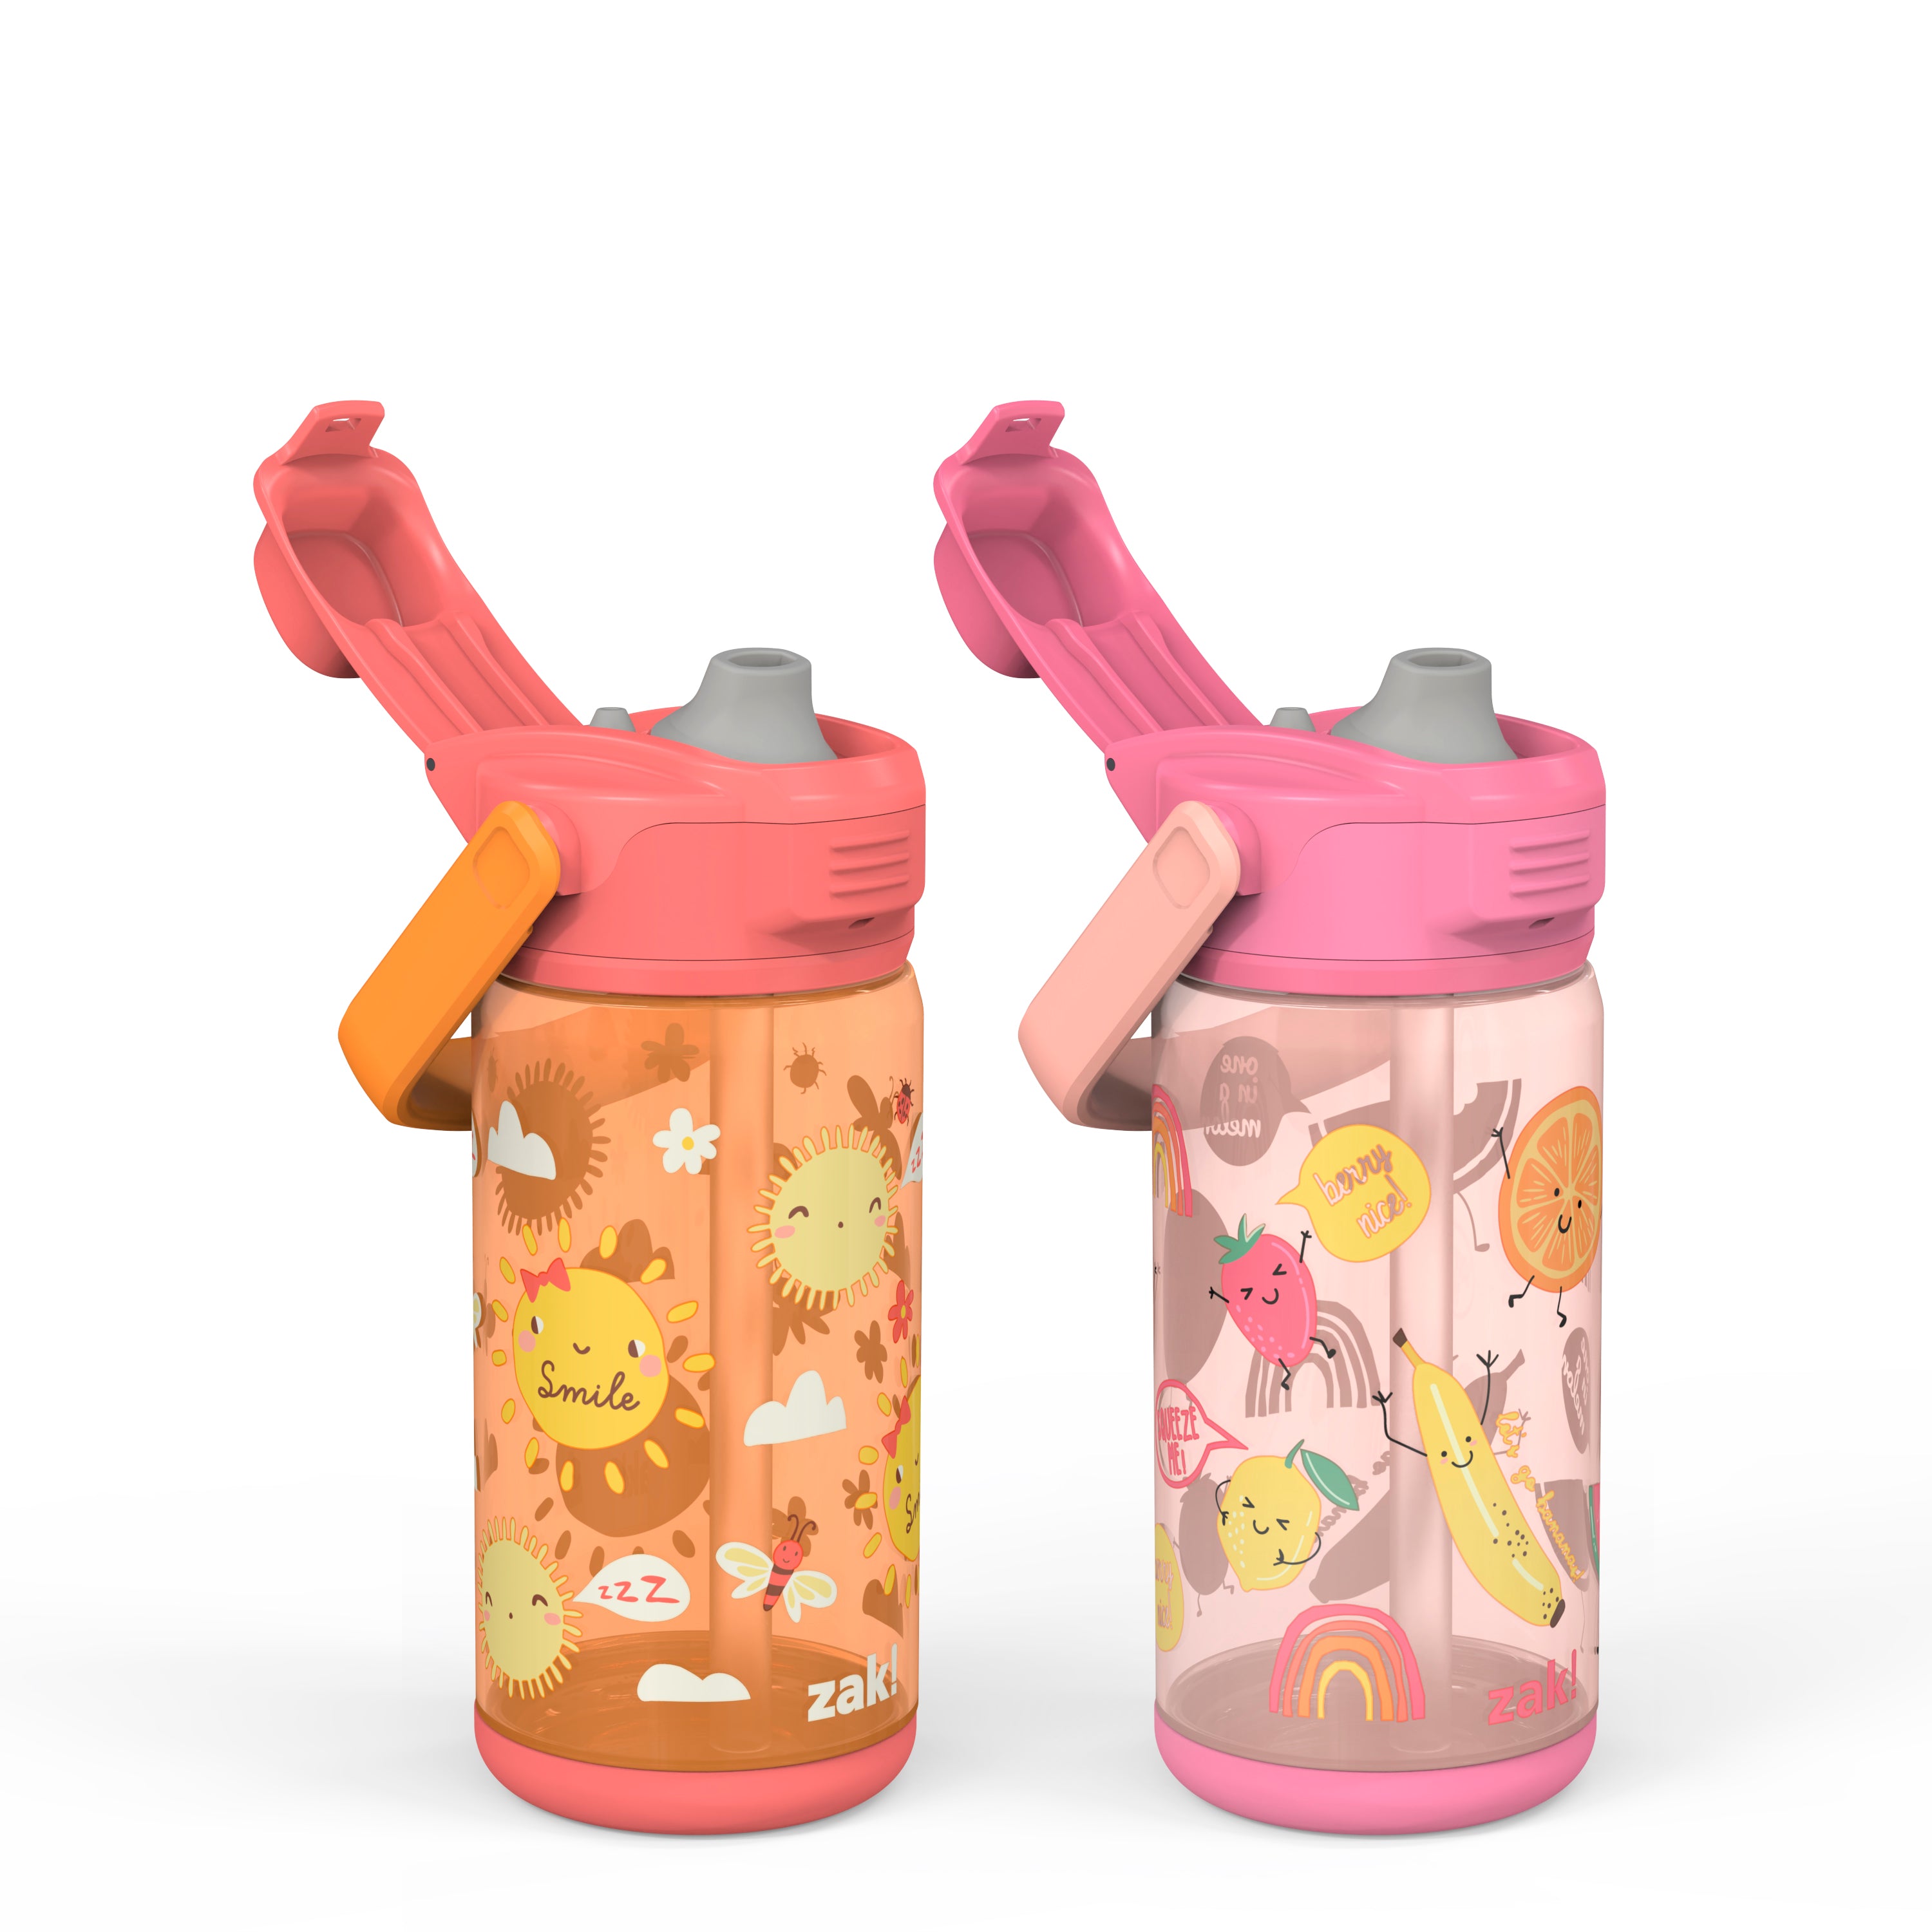 Paw Patrol Beacon 2-Piece Kids Water Bottle Set with Covered Spout, 16 Ounces